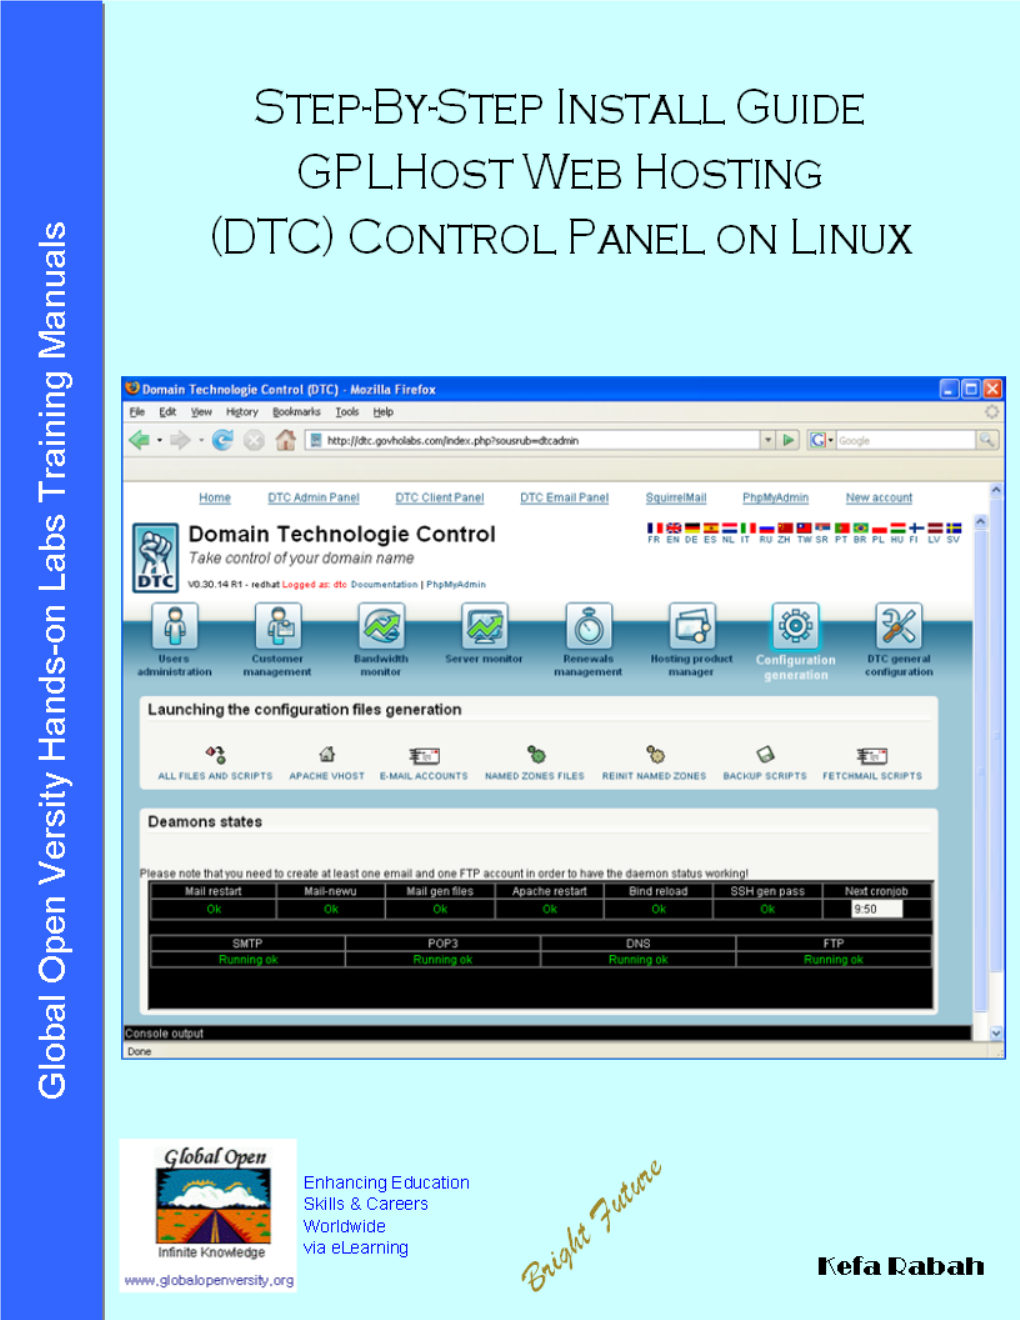 Step-By-Step Install Guide DTC Gplhost Web Hosting Control Panel on Linux Centos5 Server